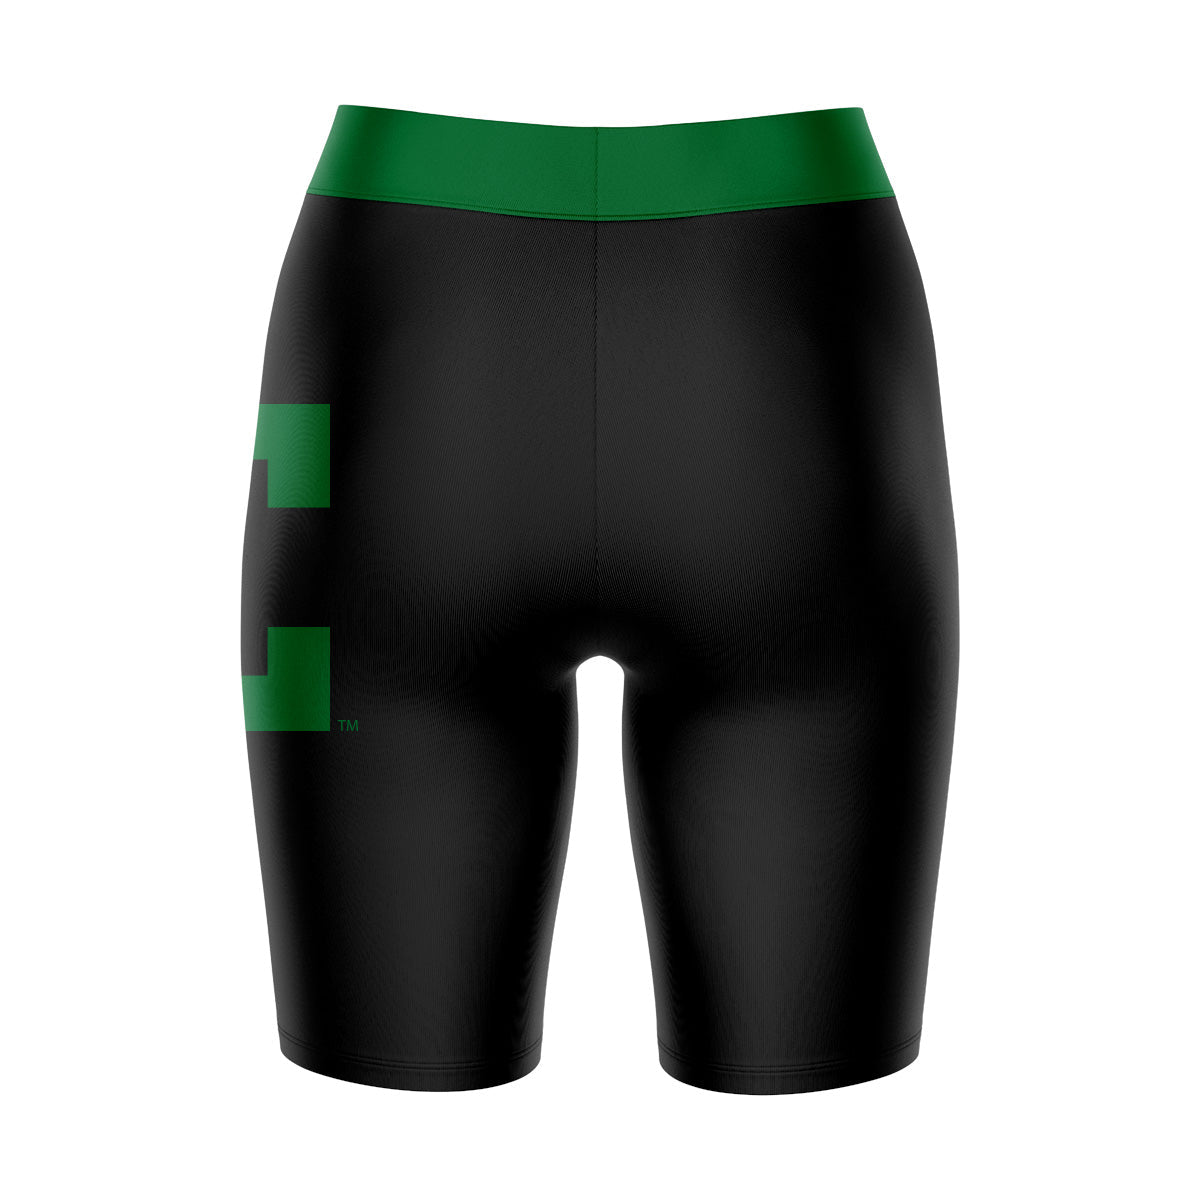 EMU Eagles Vive La Fete Game Day Logo on Thigh and Waistband Black and Green Women Bike Short 9 Inseam"